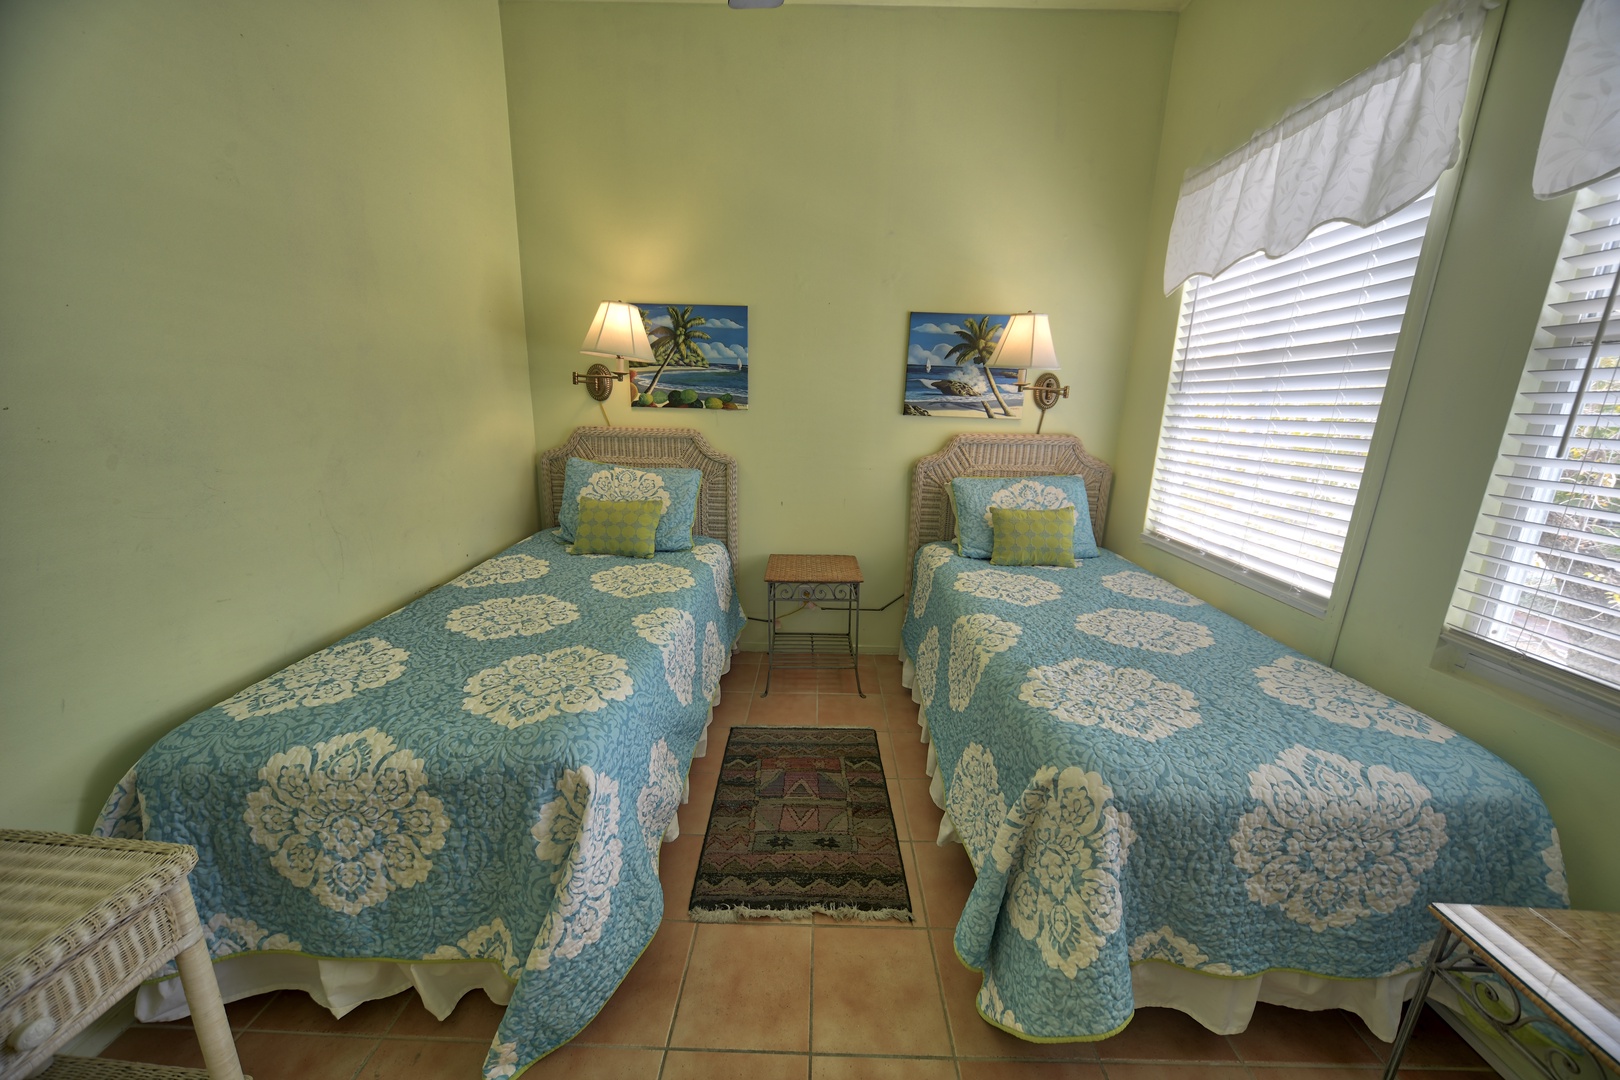 3rd Bedroom Courtyard Condo @ Duval Square Key West